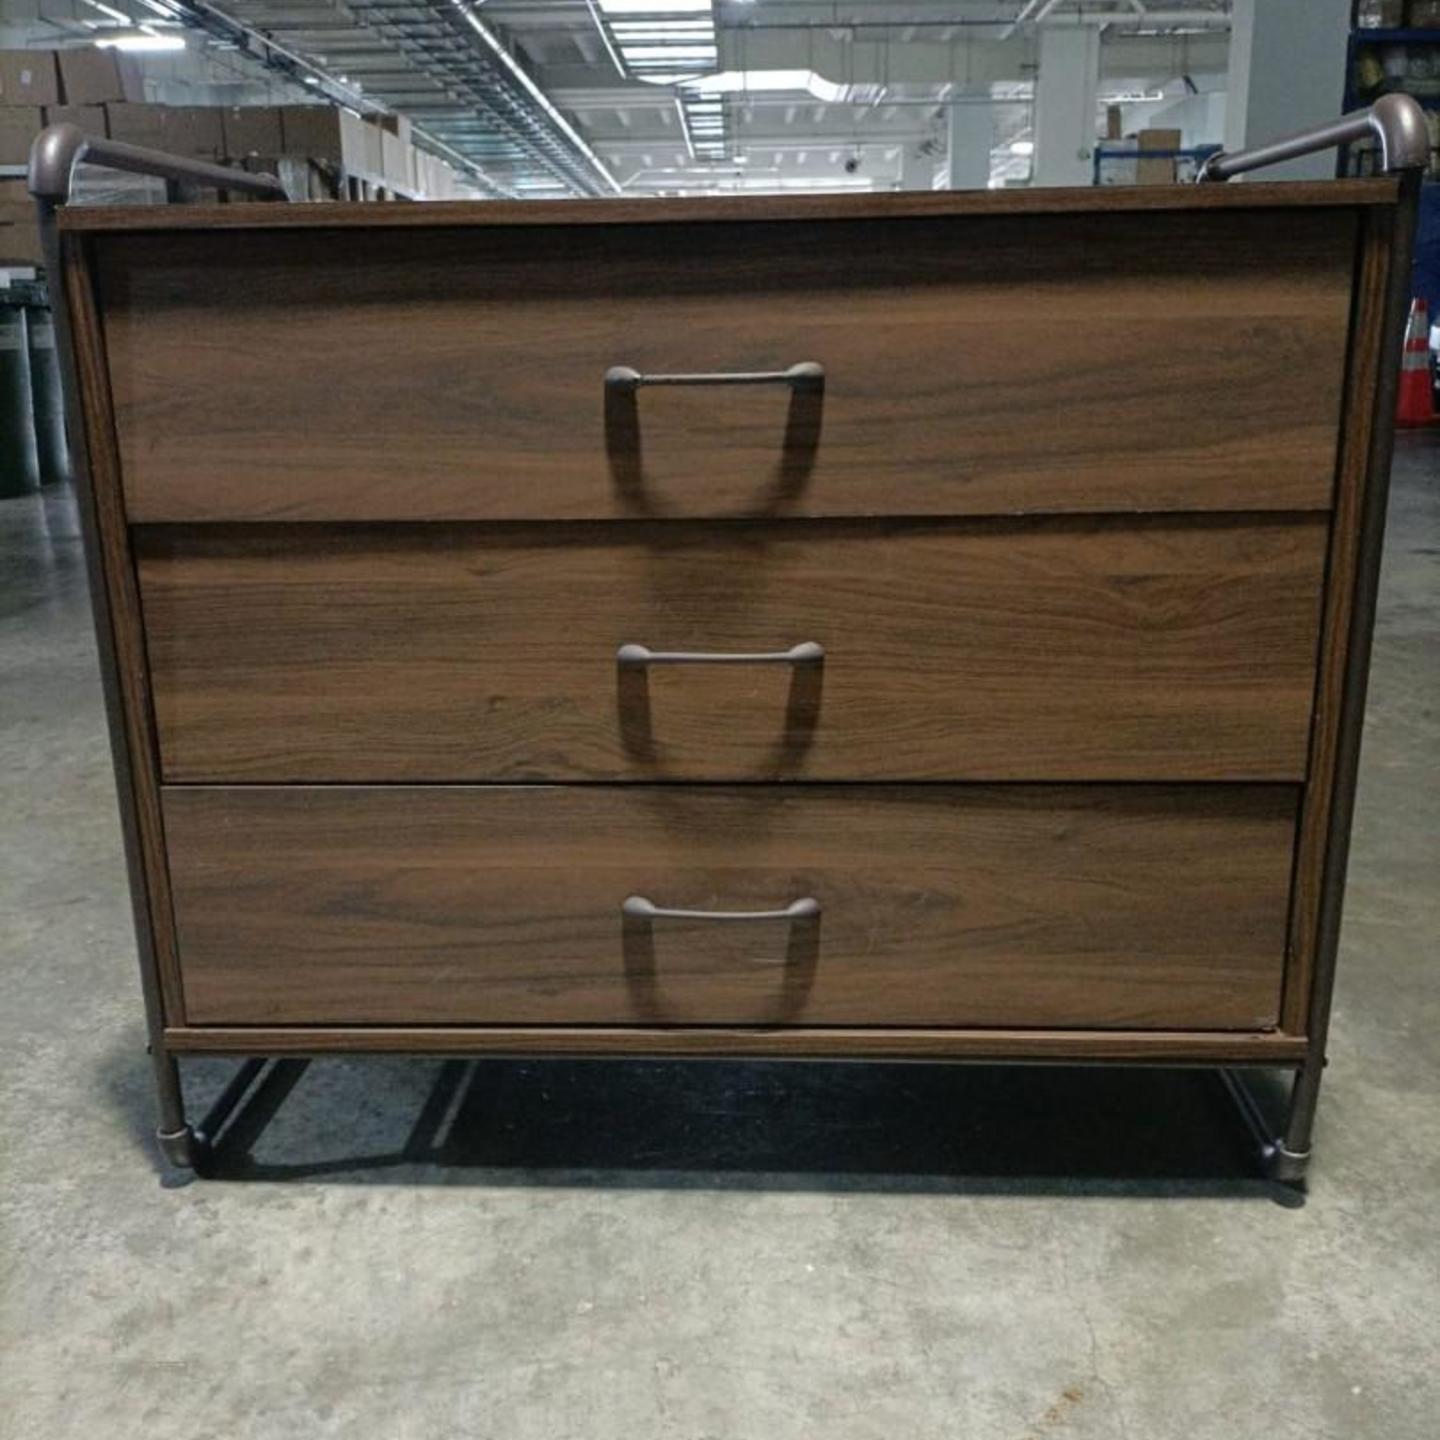 ETHAN INDUSTRI Series Chest of Drawers